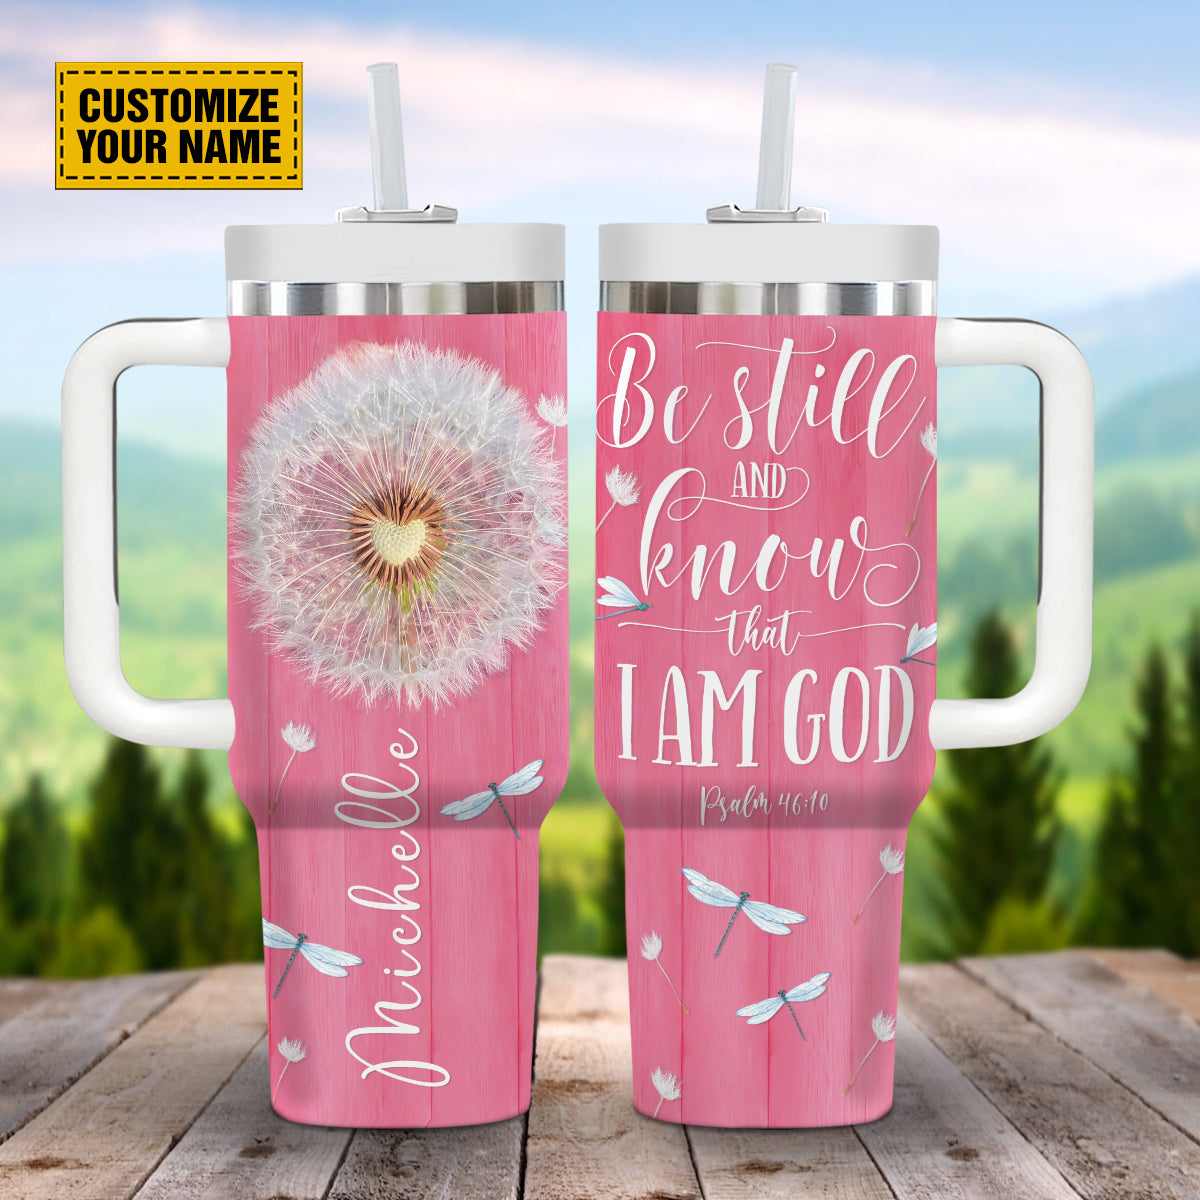 Teesdily | Customized Dandelion Dragonfly Tumbler Cups, Be Still And Know That I Am God, Christian Gifts For Women, Religious Gifts 40Oz Tumbler With Handle & Straw